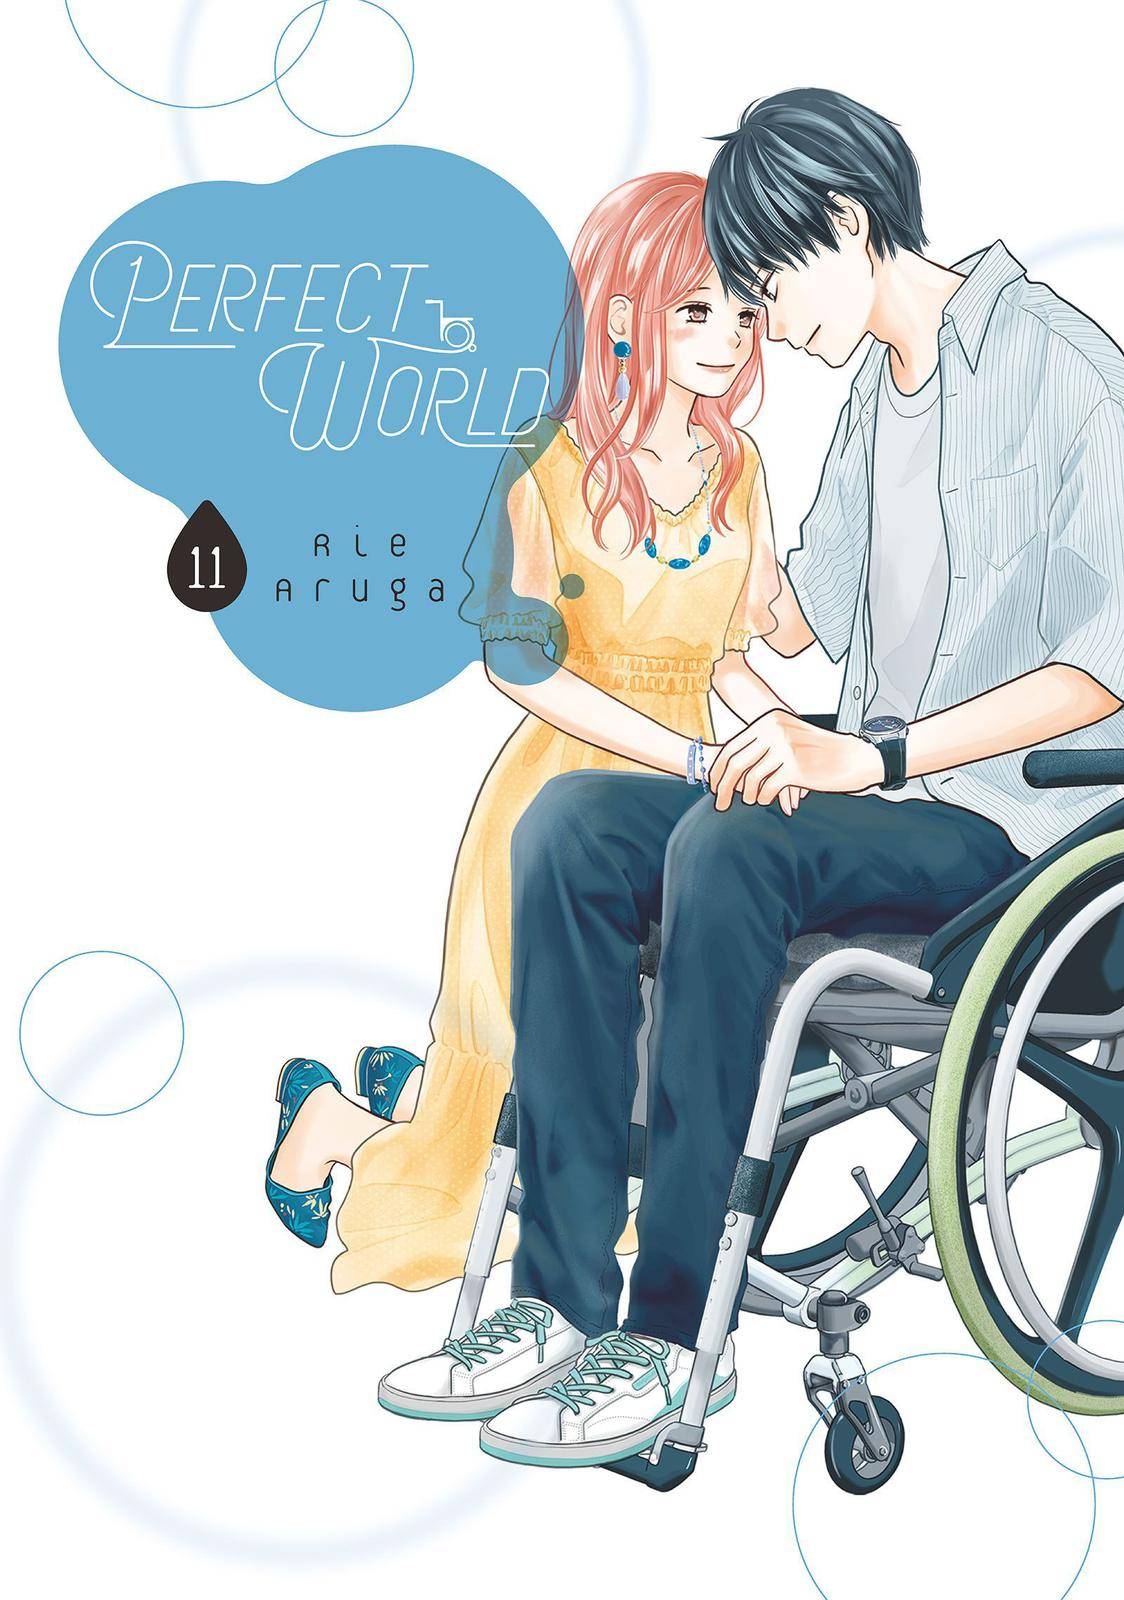 Perfect World (ARUGA Rie) - chapter 50.1 - #1